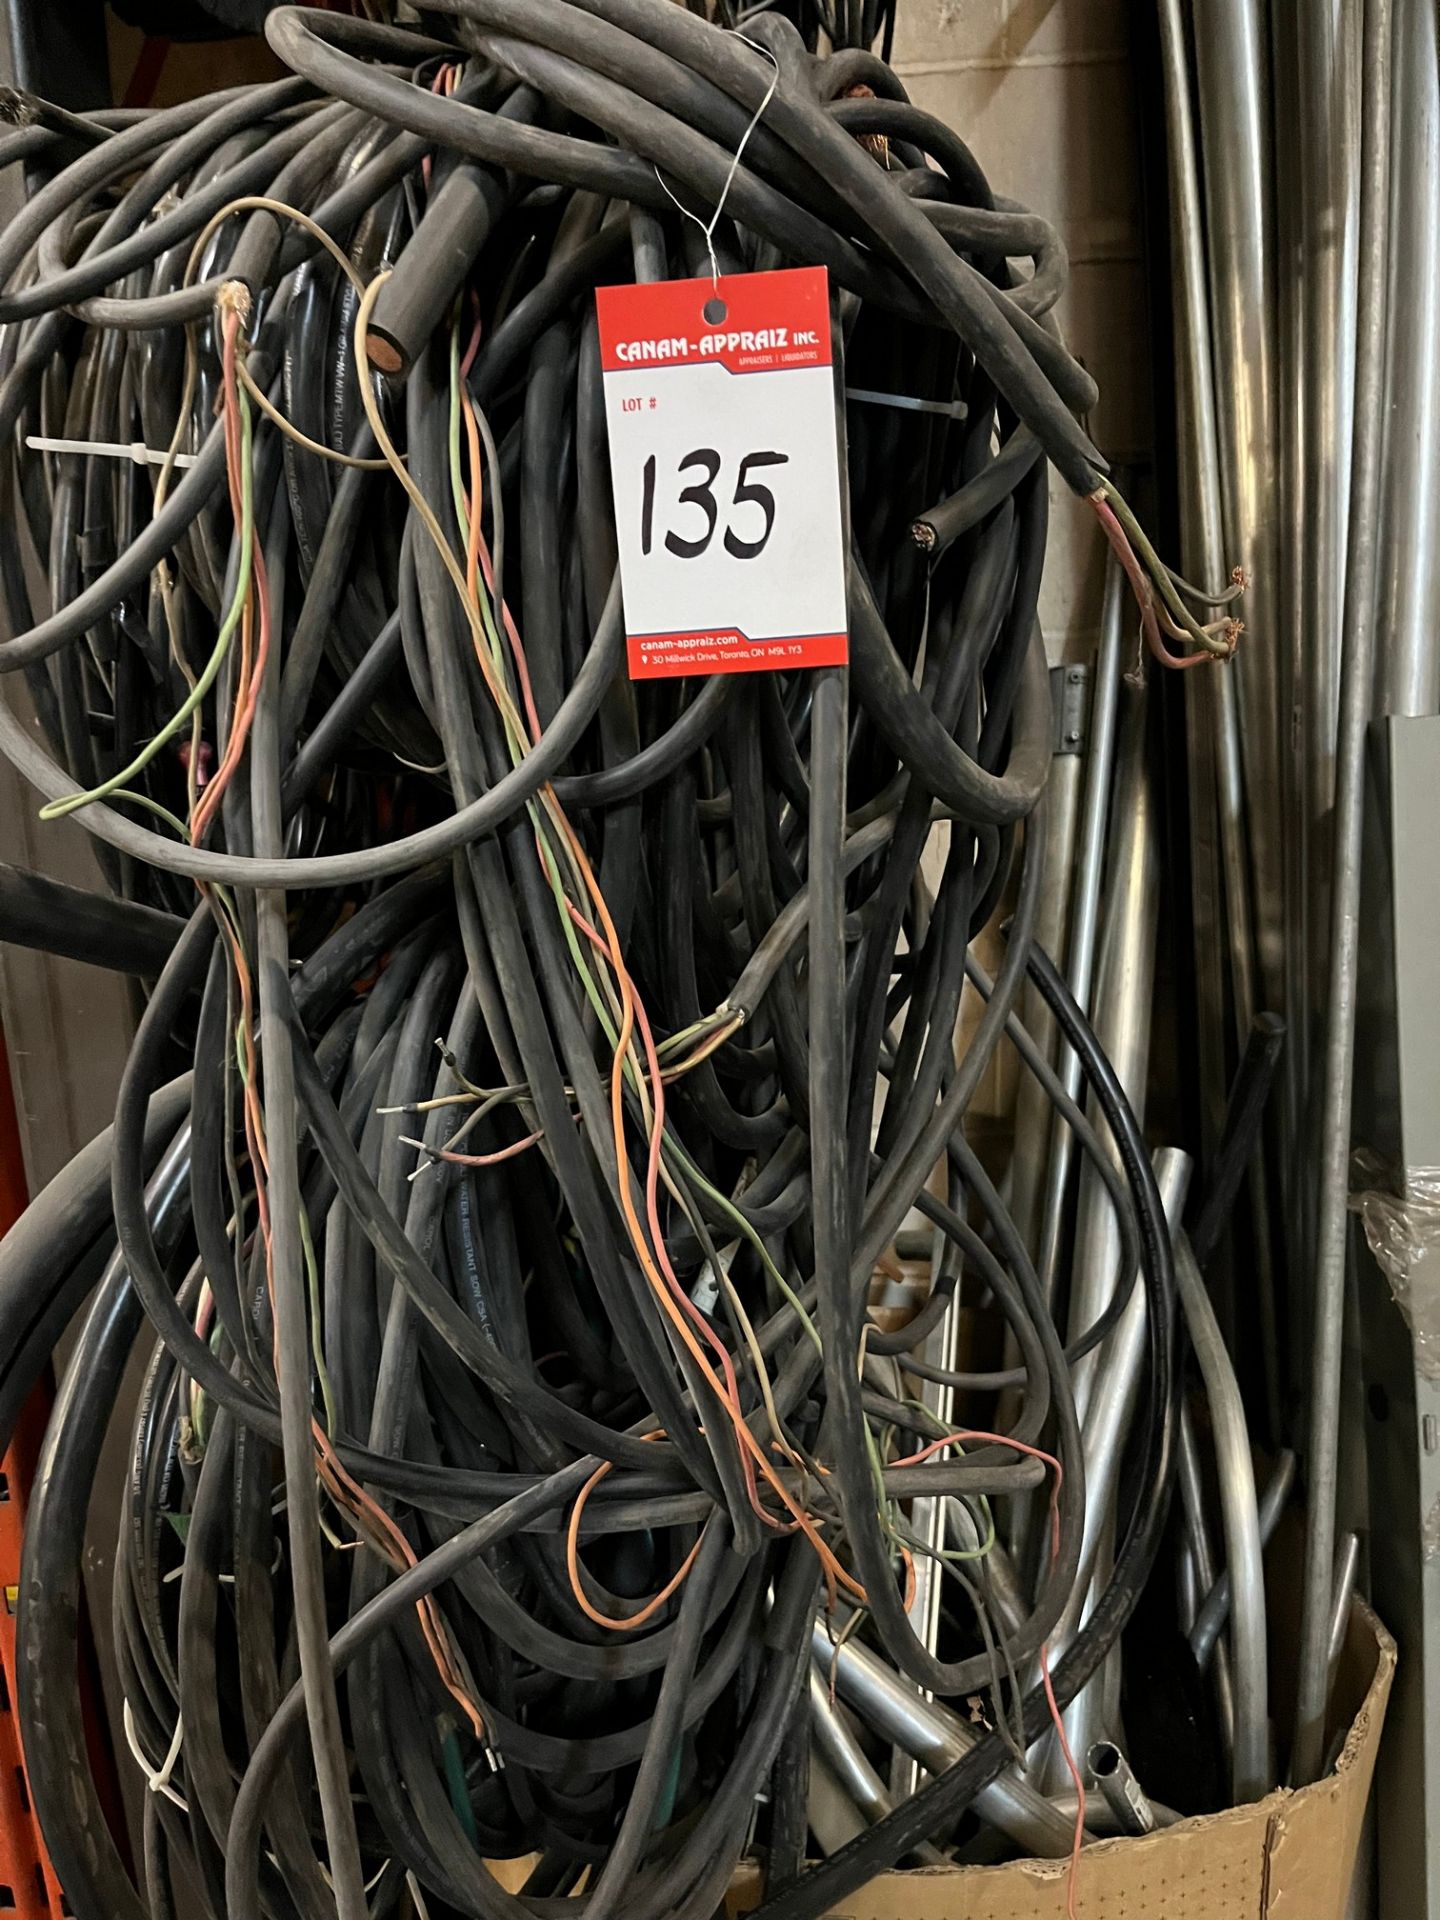 LOT OF ASST. WIRE, BELTS, ETC. - Image 2 of 2